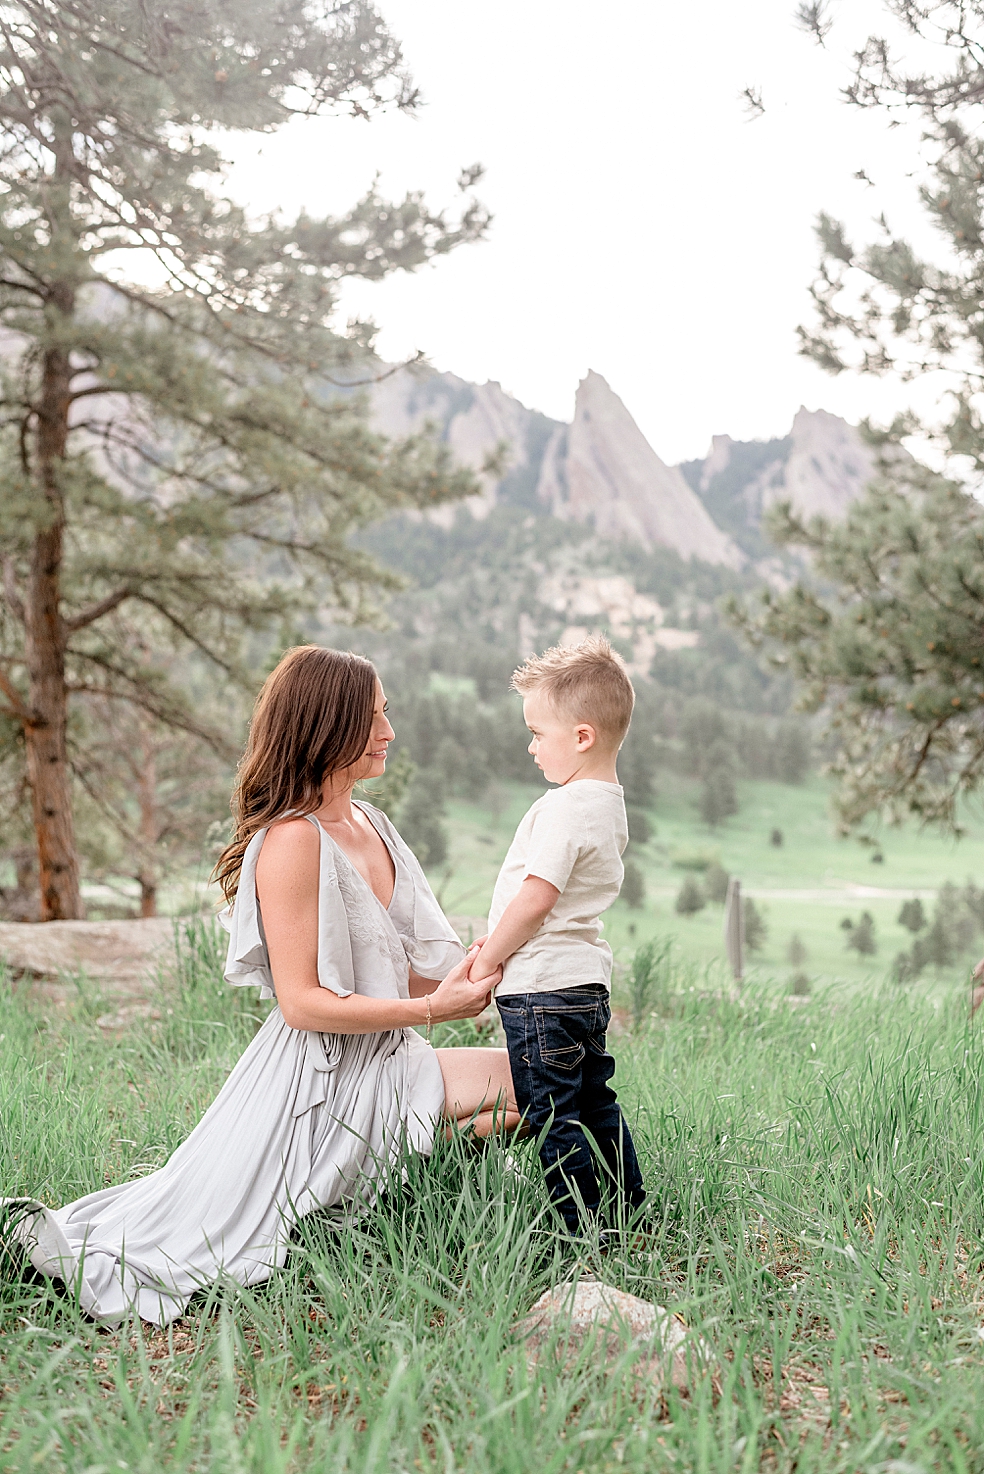 Mom and son interacting holding hands | Photo by Jessica Lee Photography